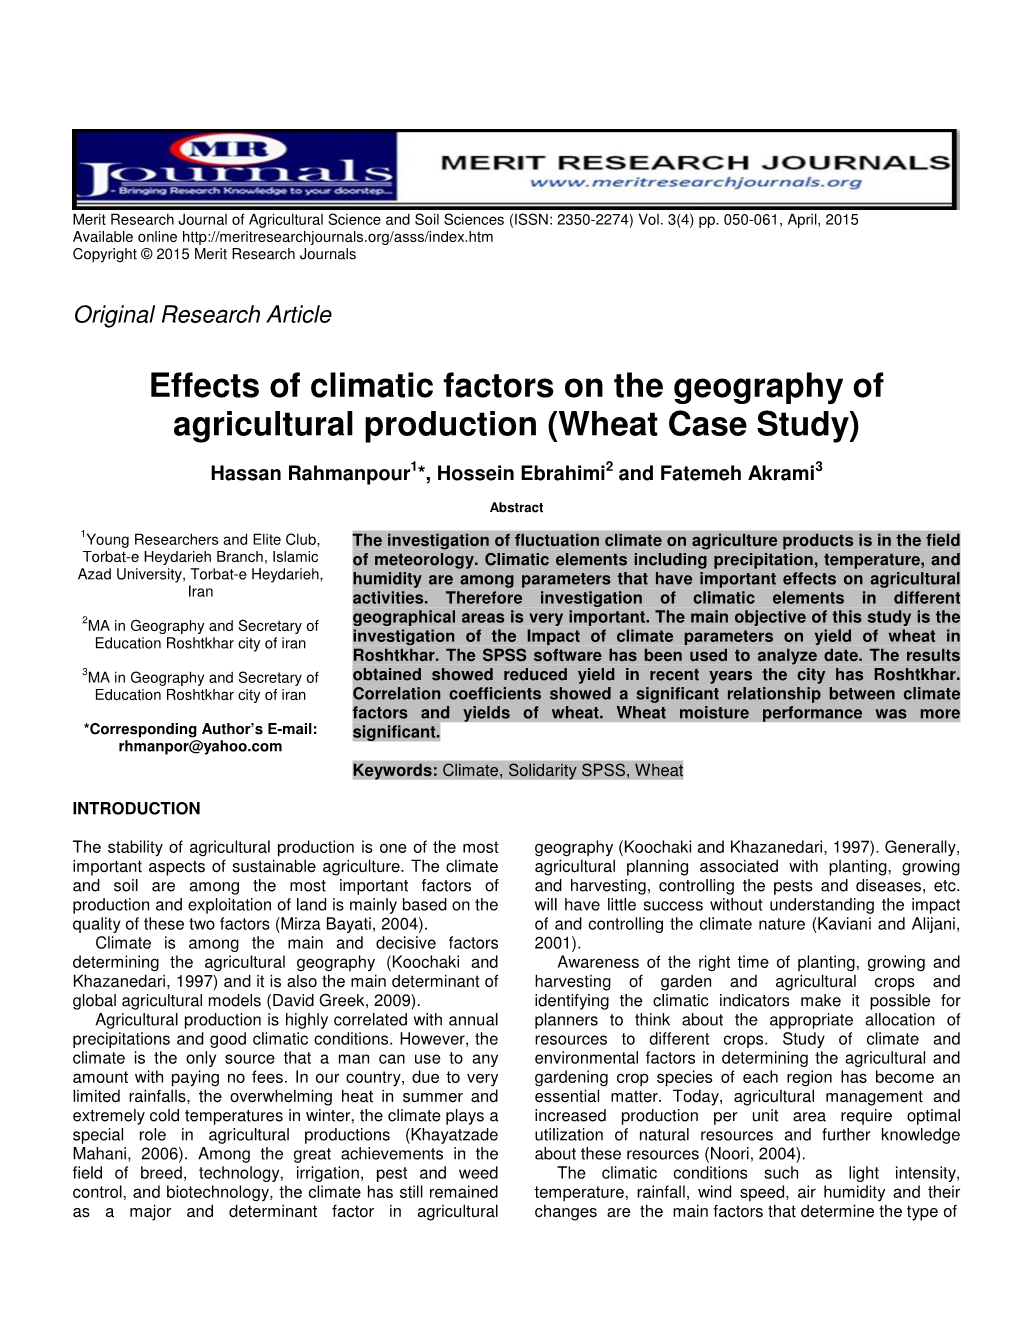 Effects of Climatic Factors on the Geography of Agricultural Production (Wheat Case Study)